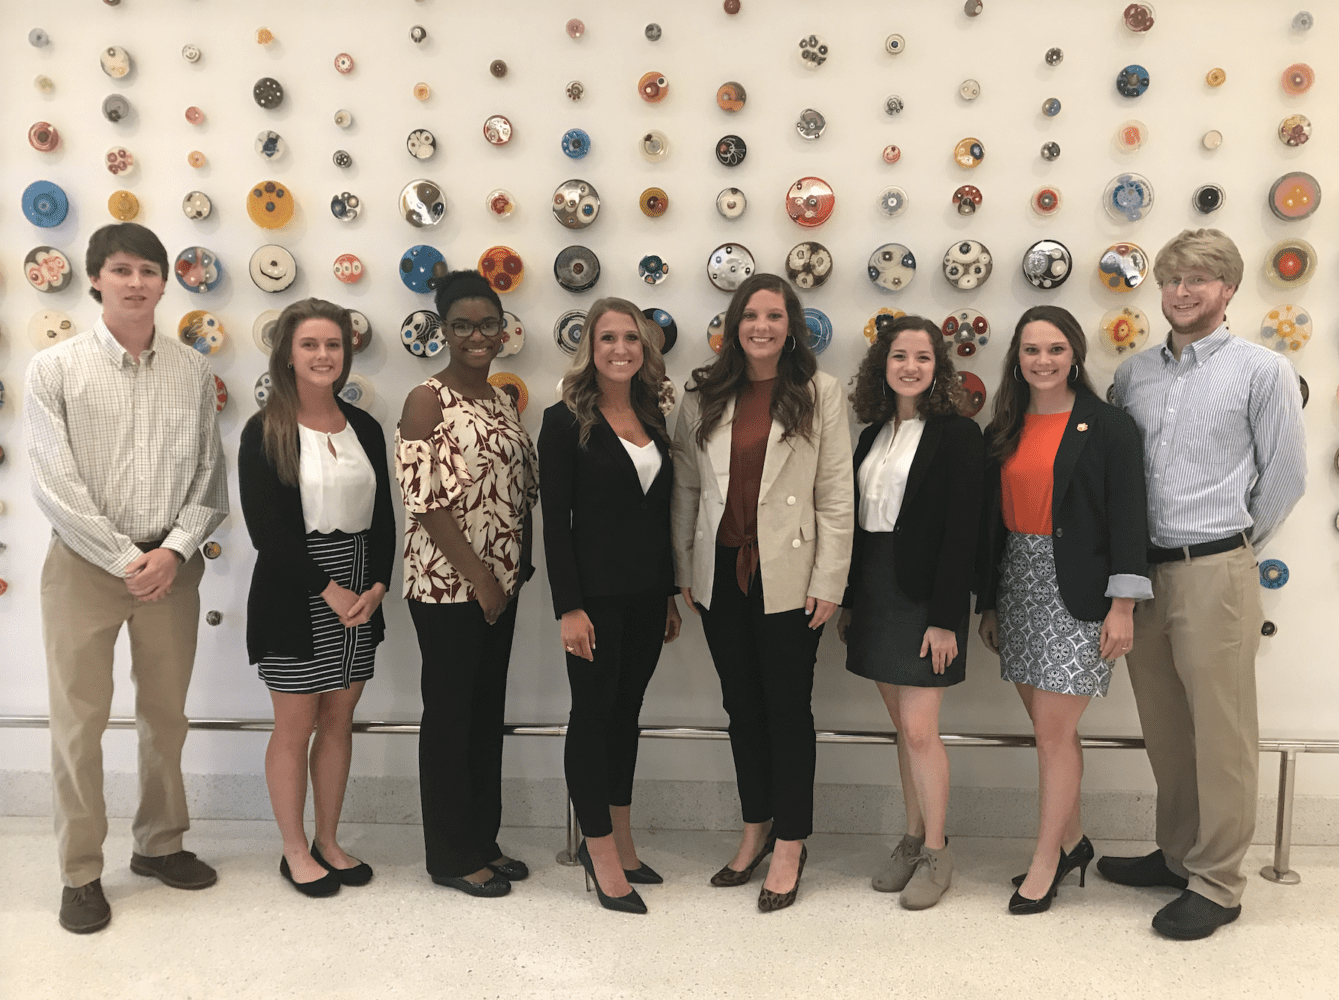 Students participating in Undergraduate Research Initiative (Left to right): Andrew Purcell, Erin McDaniel, Caterra Heard-Tate, Bailee Hawkins, Jessie Comer, Camille Smith, Texanna Miller, and Paul Millar